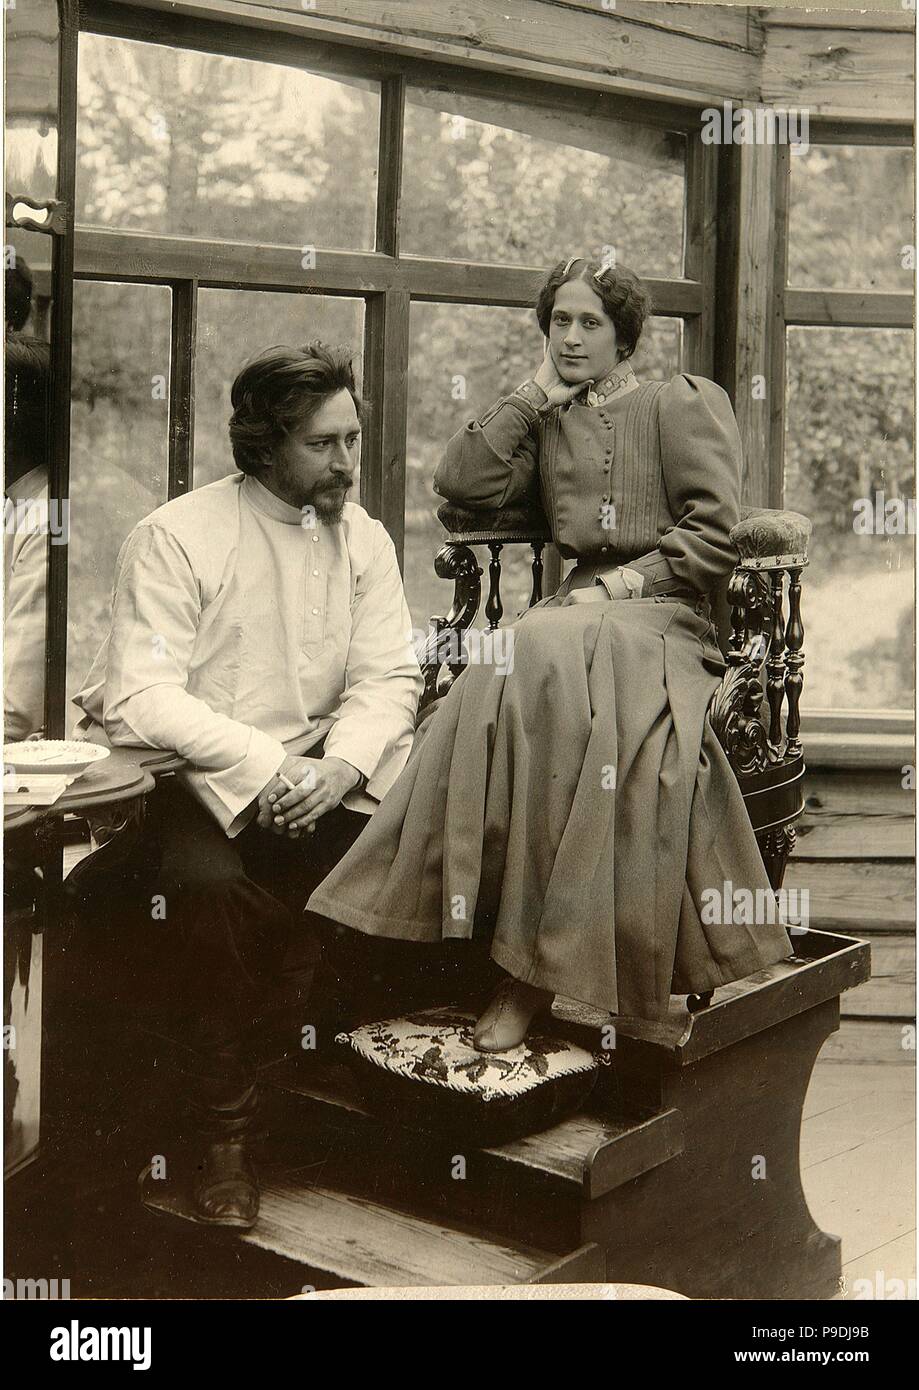 Author Leonid Andreyev with his wife Alexandra Michailovna. Museum: State History Museum, Moscow. Stock Photo